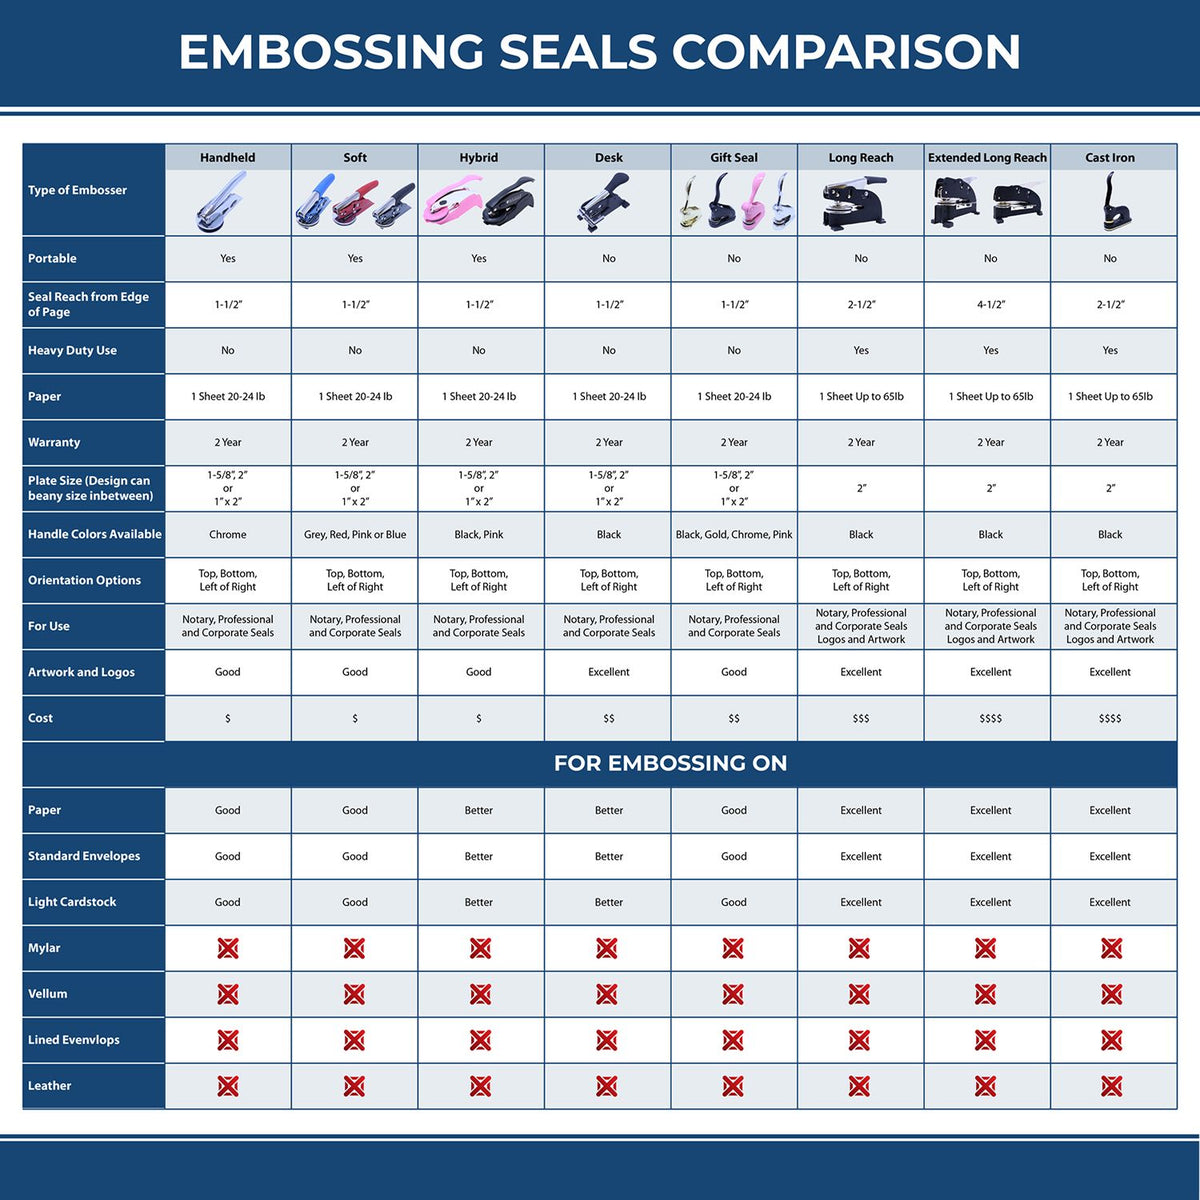 A comparison chart for the different types of mount models available for the Handheld Massachusetts Land Surveyor Seal.